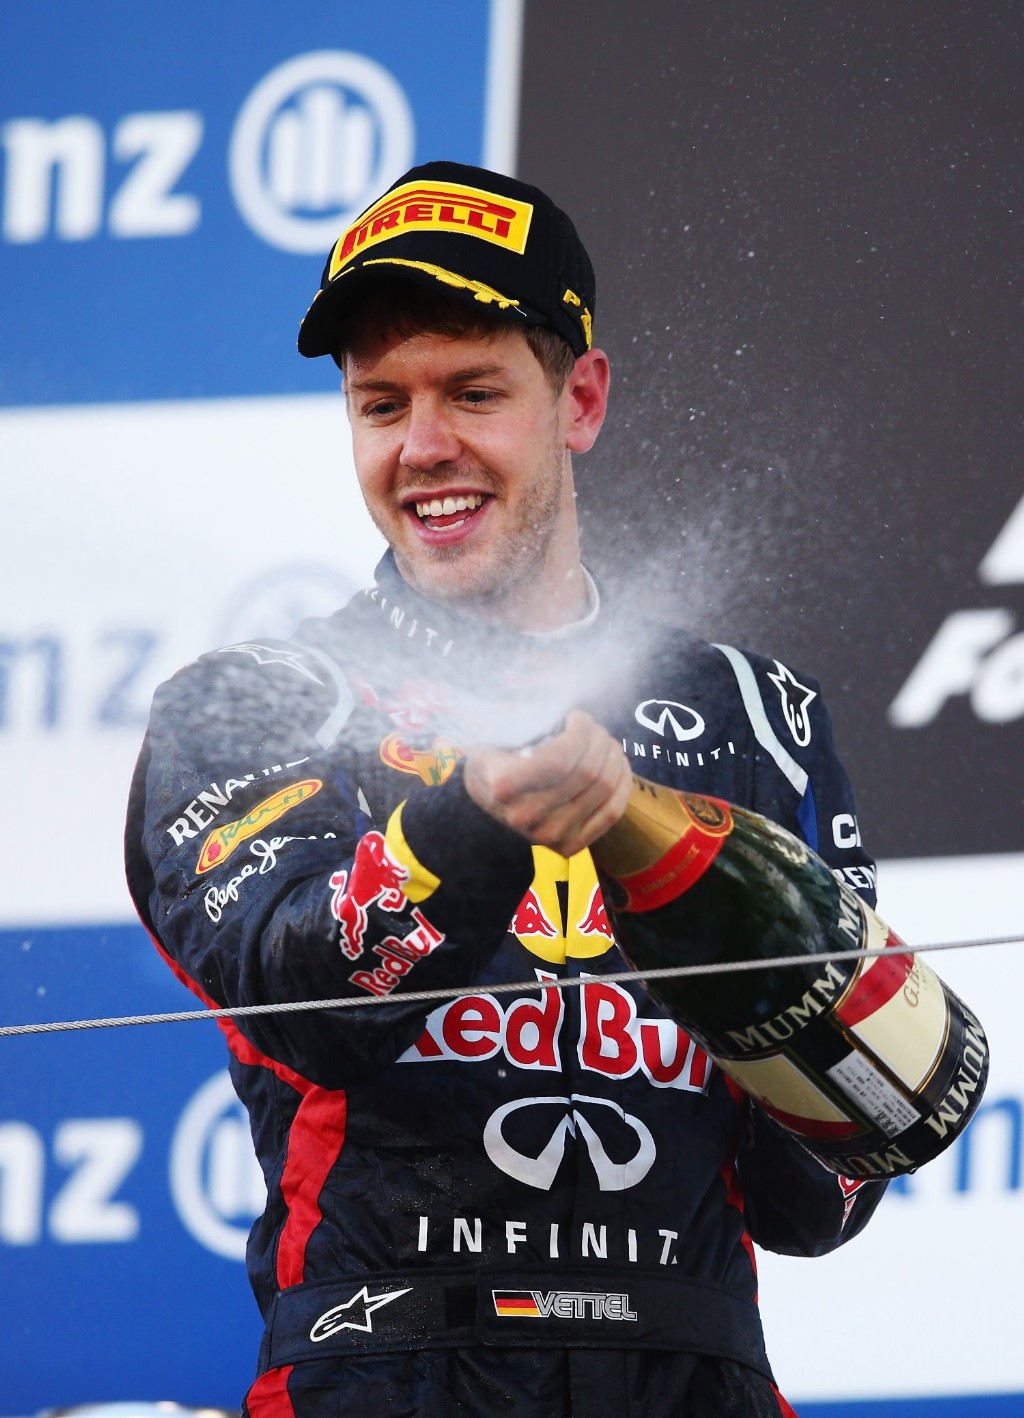 Such a move would bring Vettel back to where he had so much success